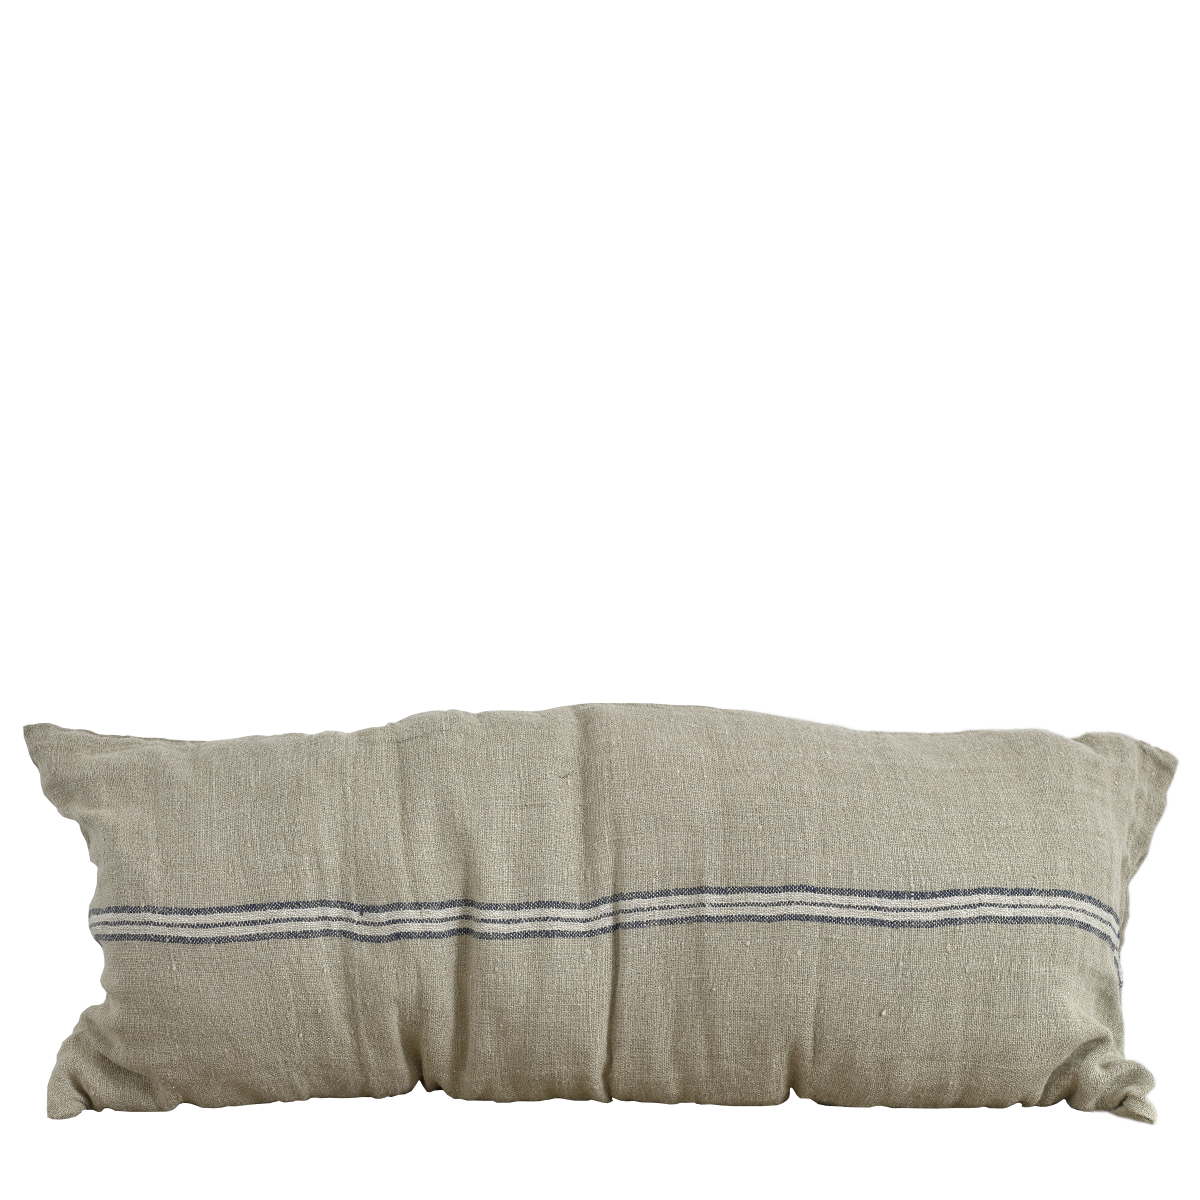 Linen Pillowcase with Half Stripe and 3 Wooden Buttons